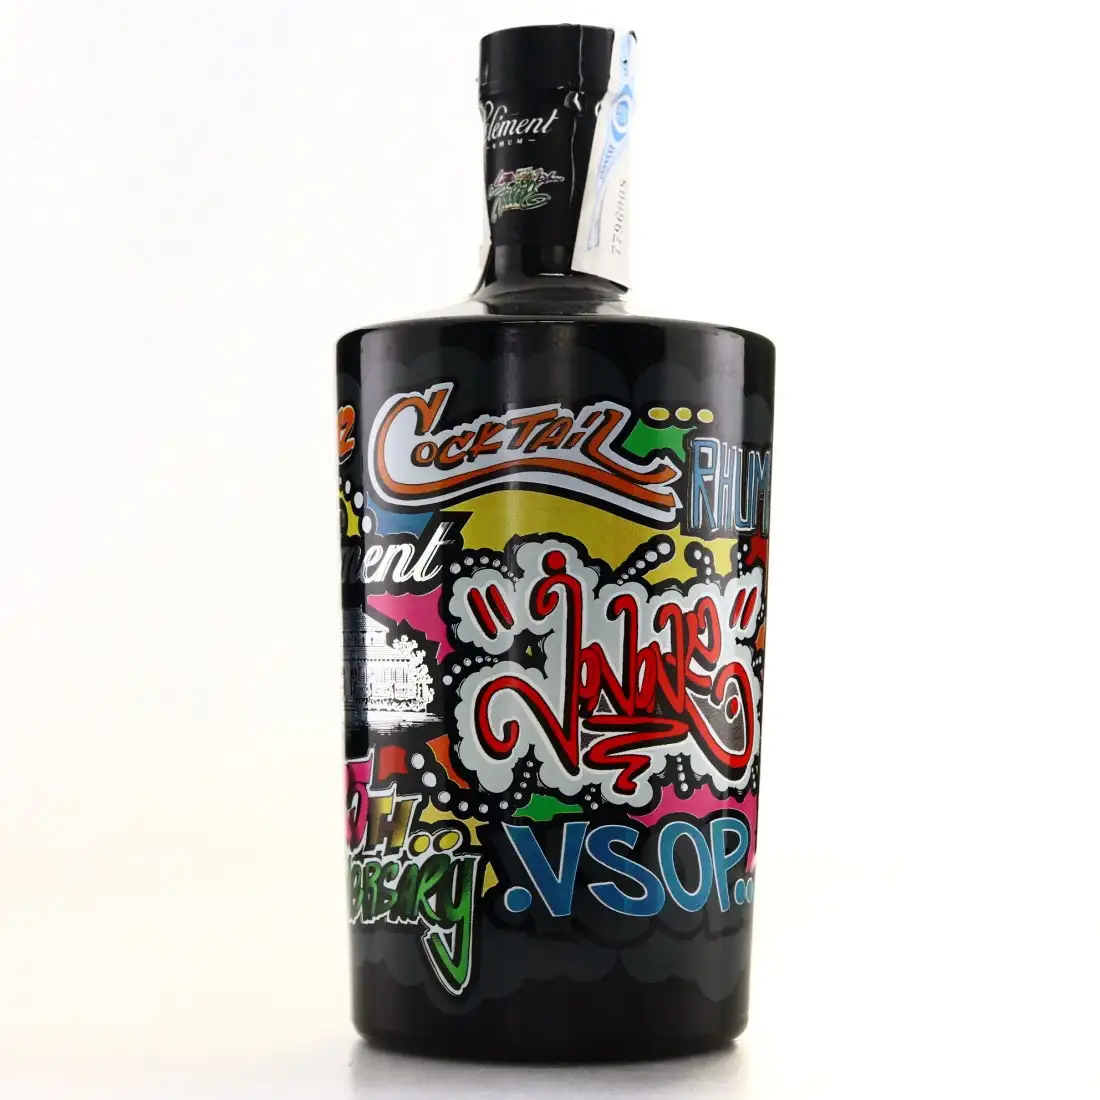 Image of the front of the bottle of the rum Clément VSOP 125th Anniversary Edition by JonOne